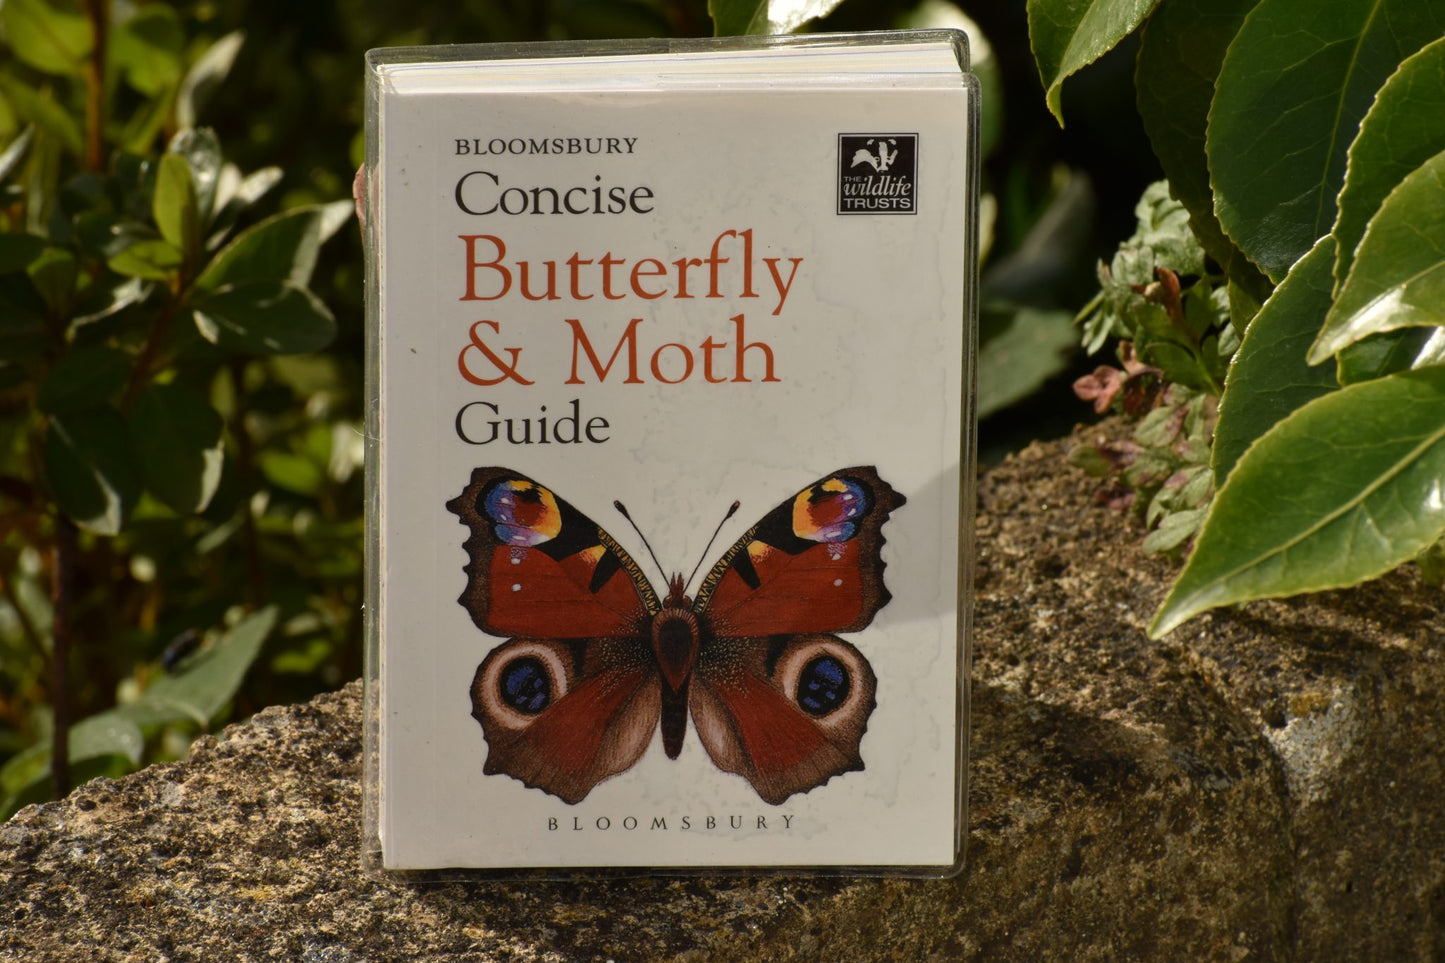 Bloomsbury Concise Butterfly and Moth Guide